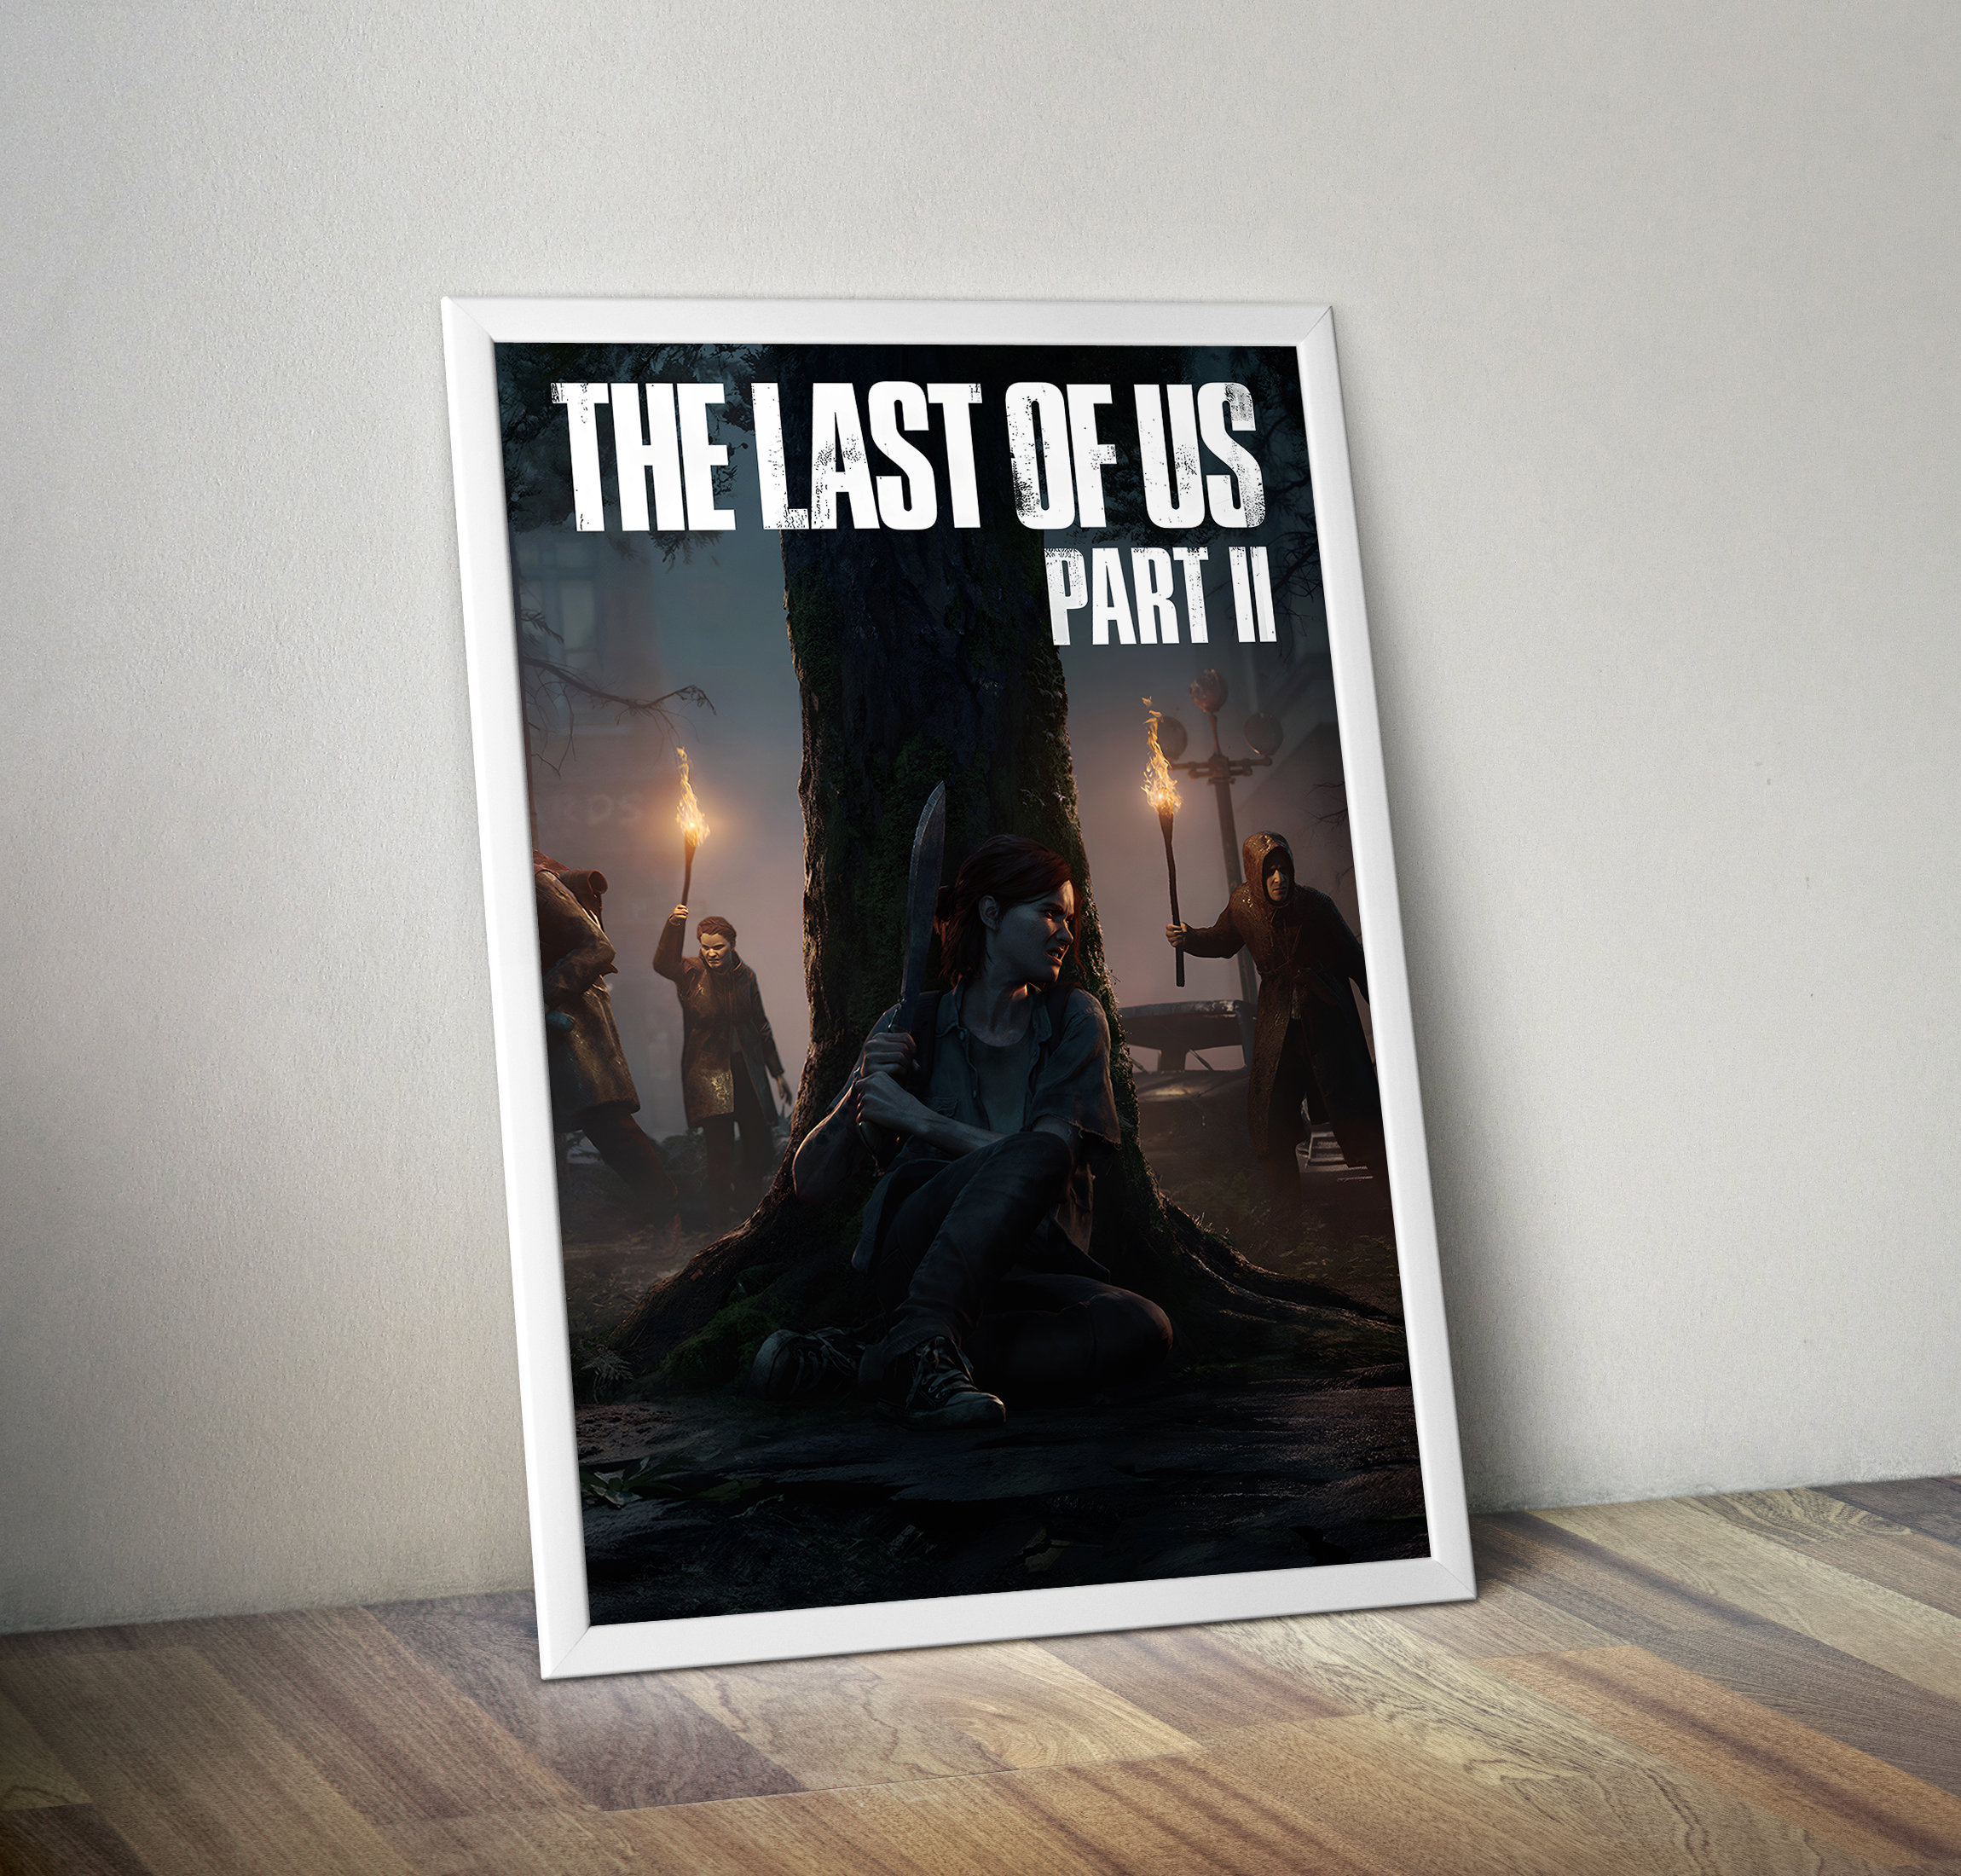 The Last of Us Video Game Poster Collection Print Home Room Decor